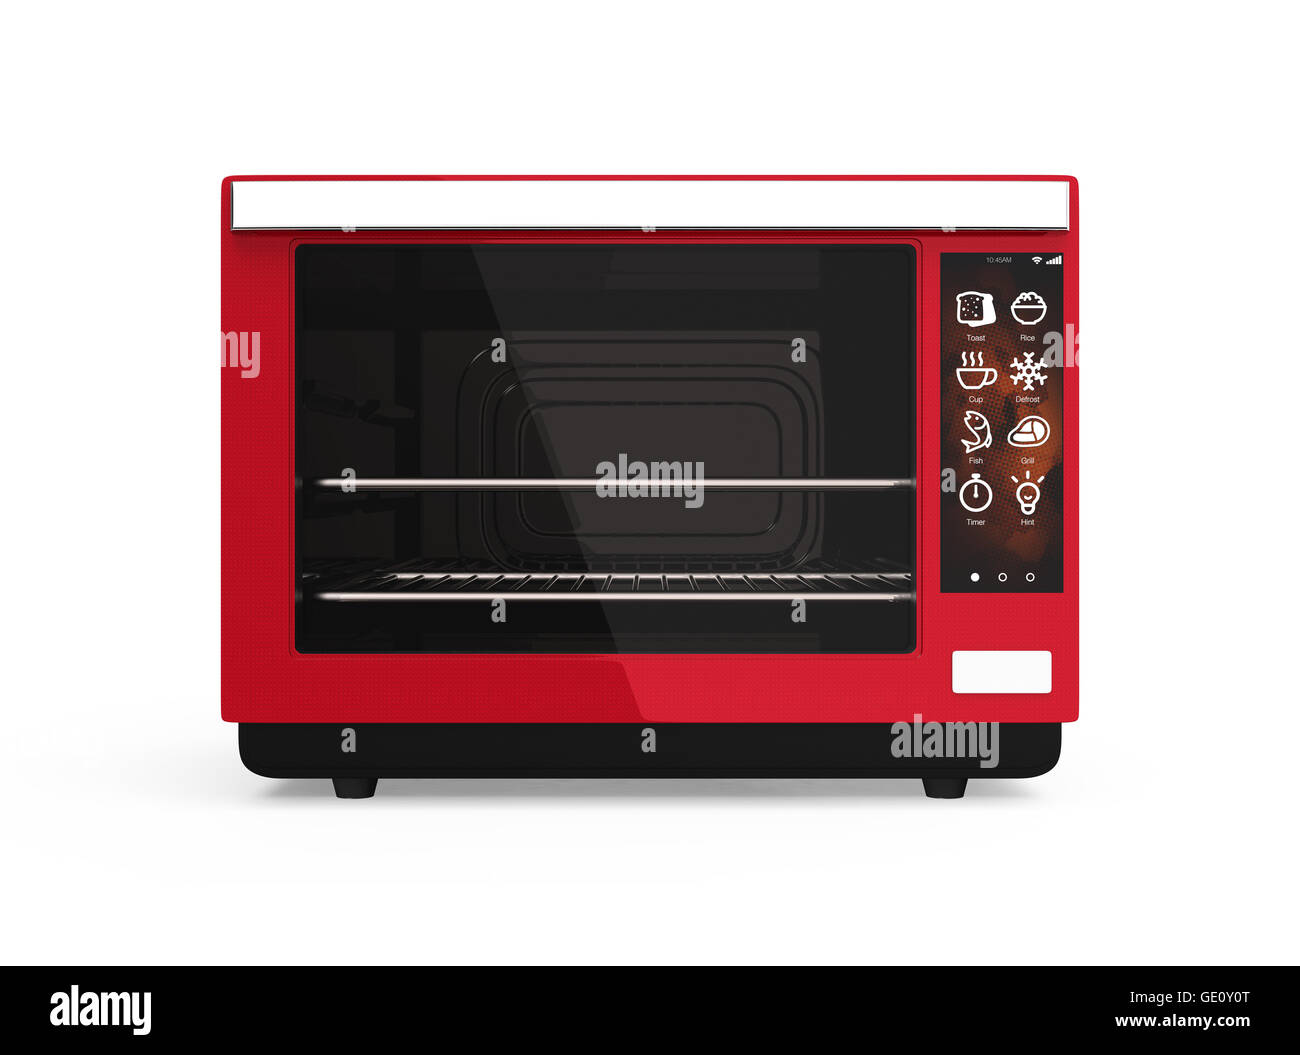 https://c8.alamy.com/comp/GE0Y0T/front-view-of-electric-oven-with-touch-screen-3d-rendering-image-with-GE0Y0T.jpg